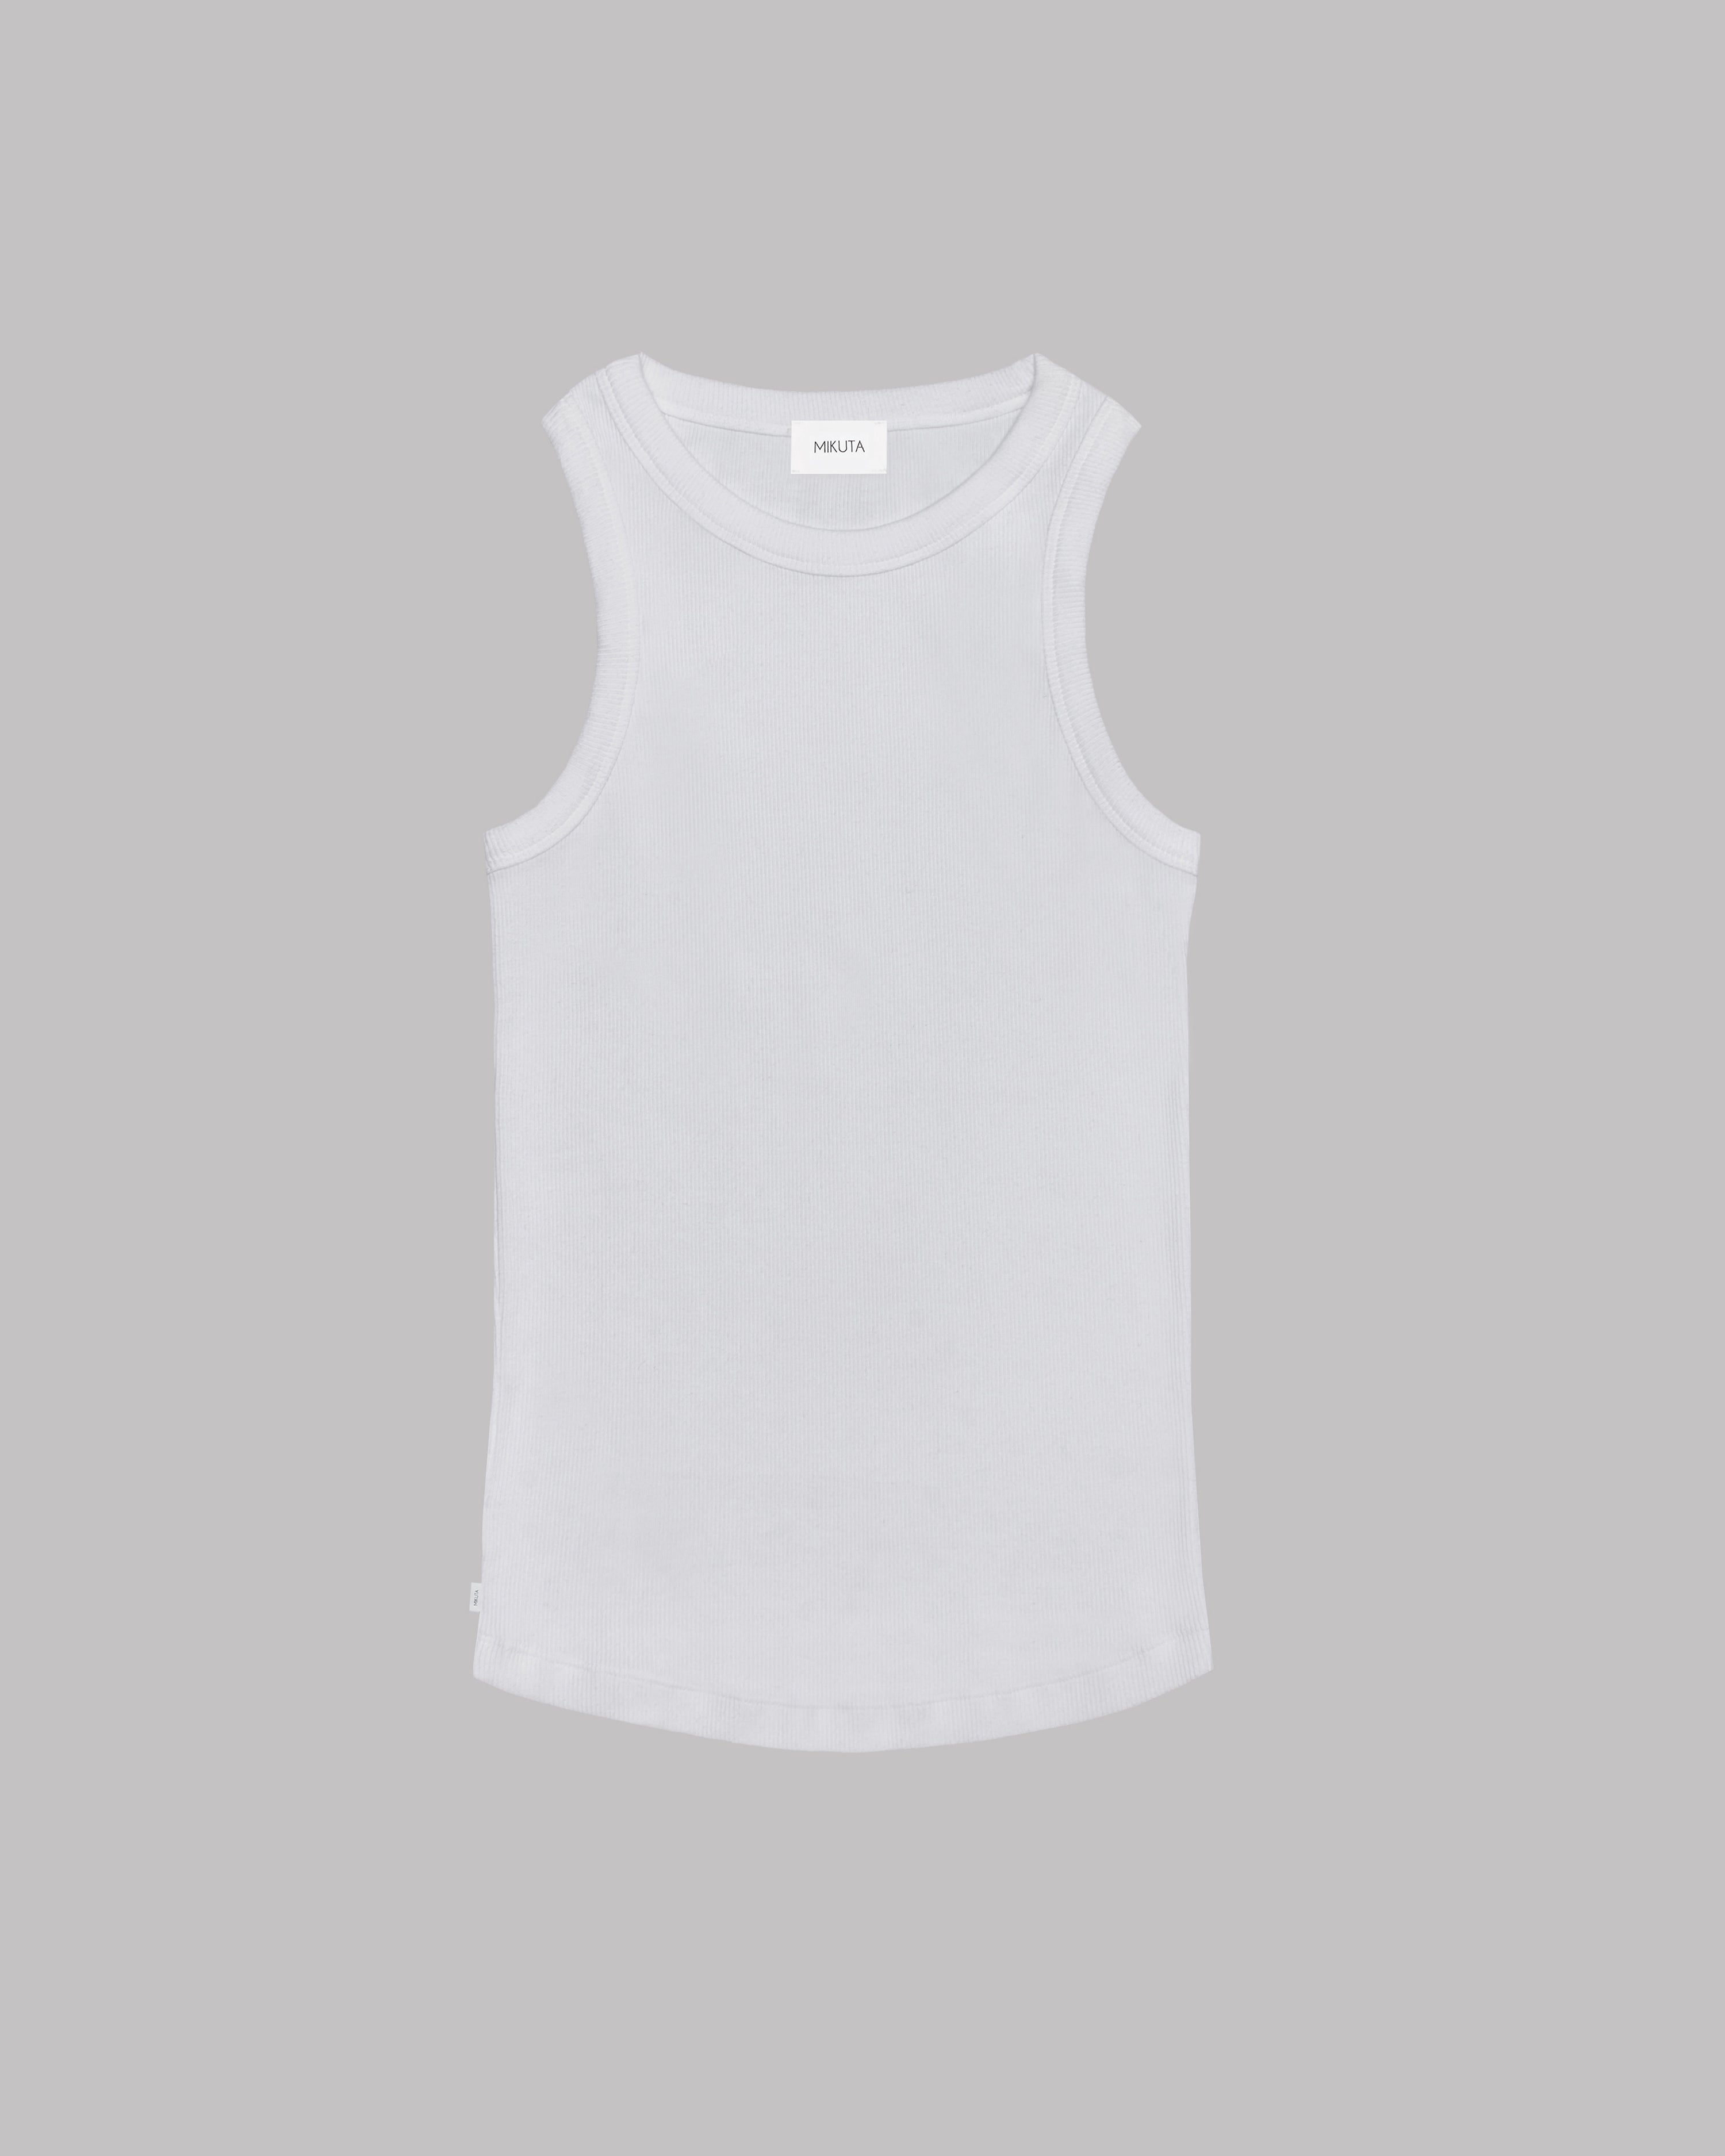 The White Standard Tank Top